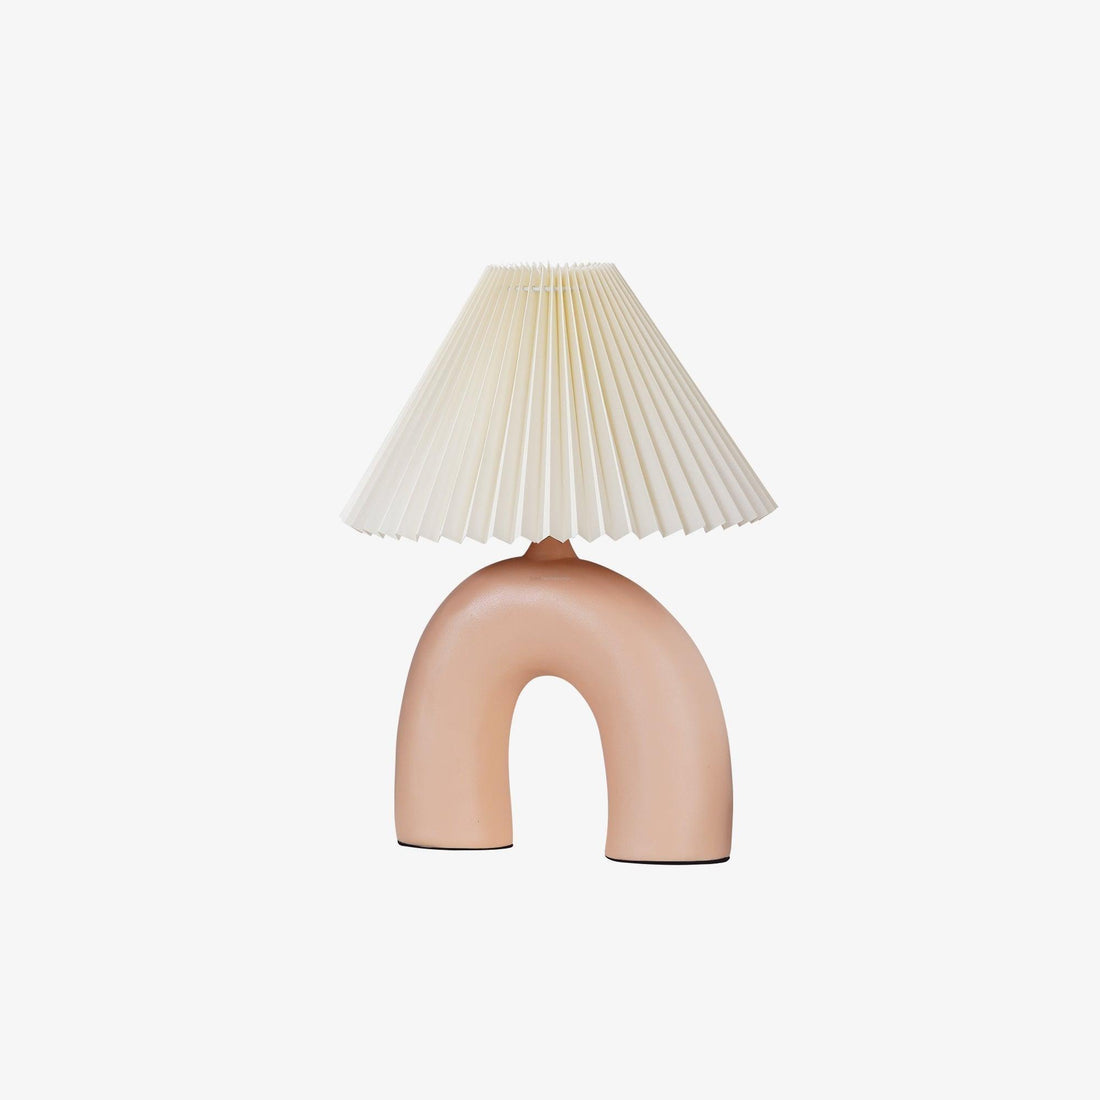 Arched Pleated Table Lamp ∅ 11.8″